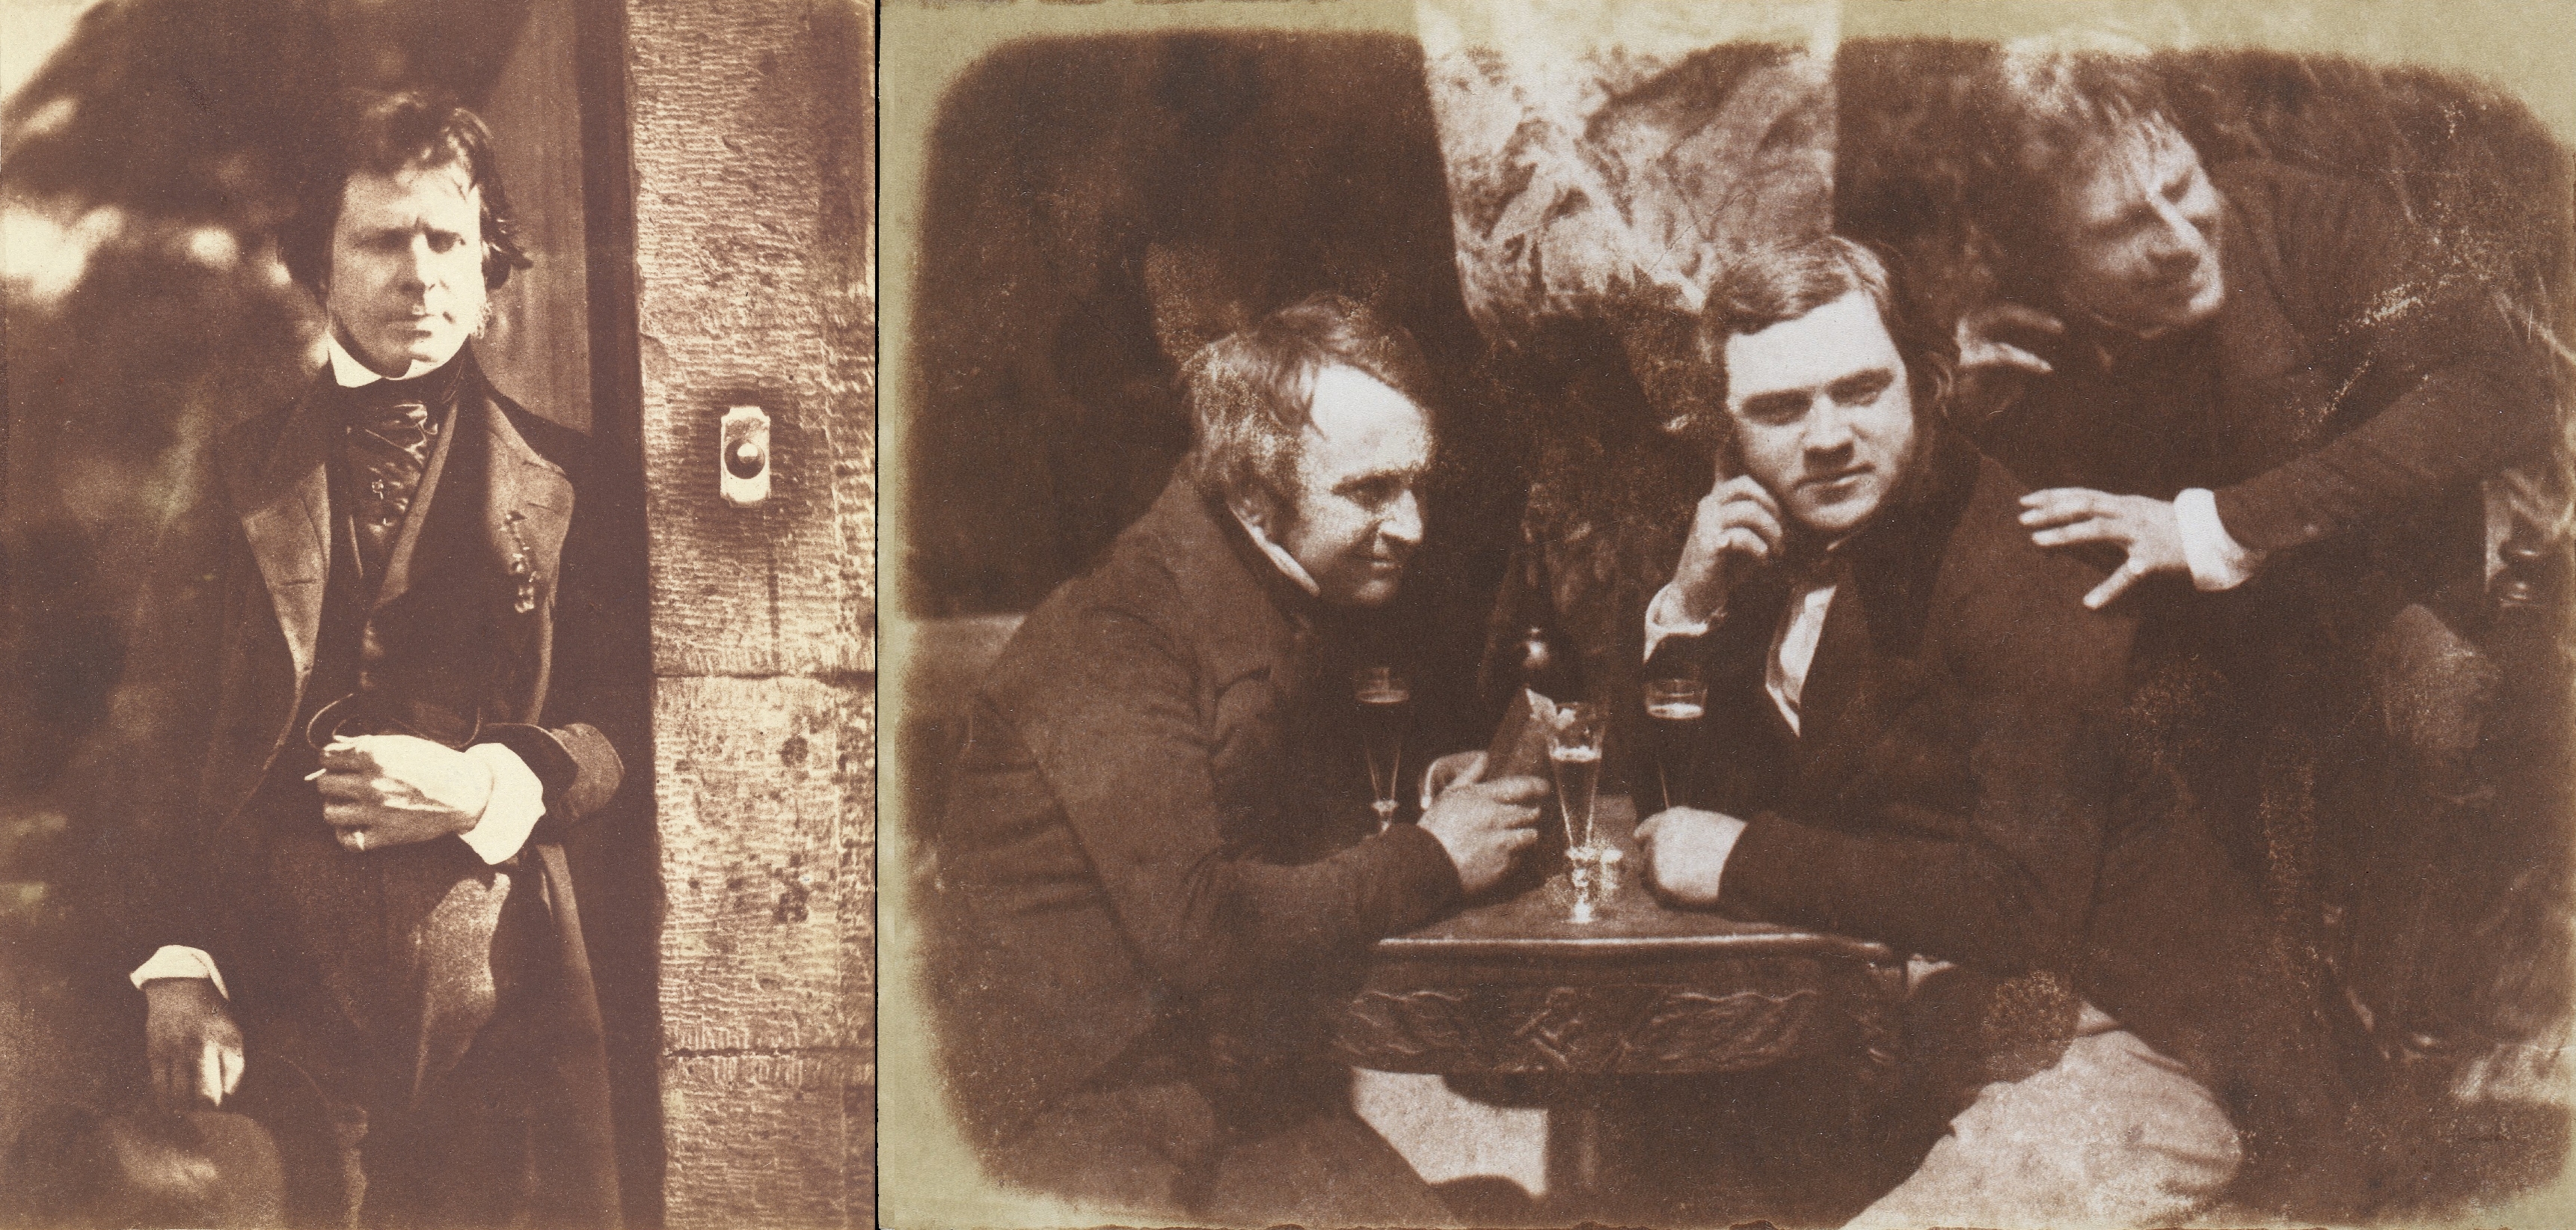 Self portrait and first photograph of men drinking beer